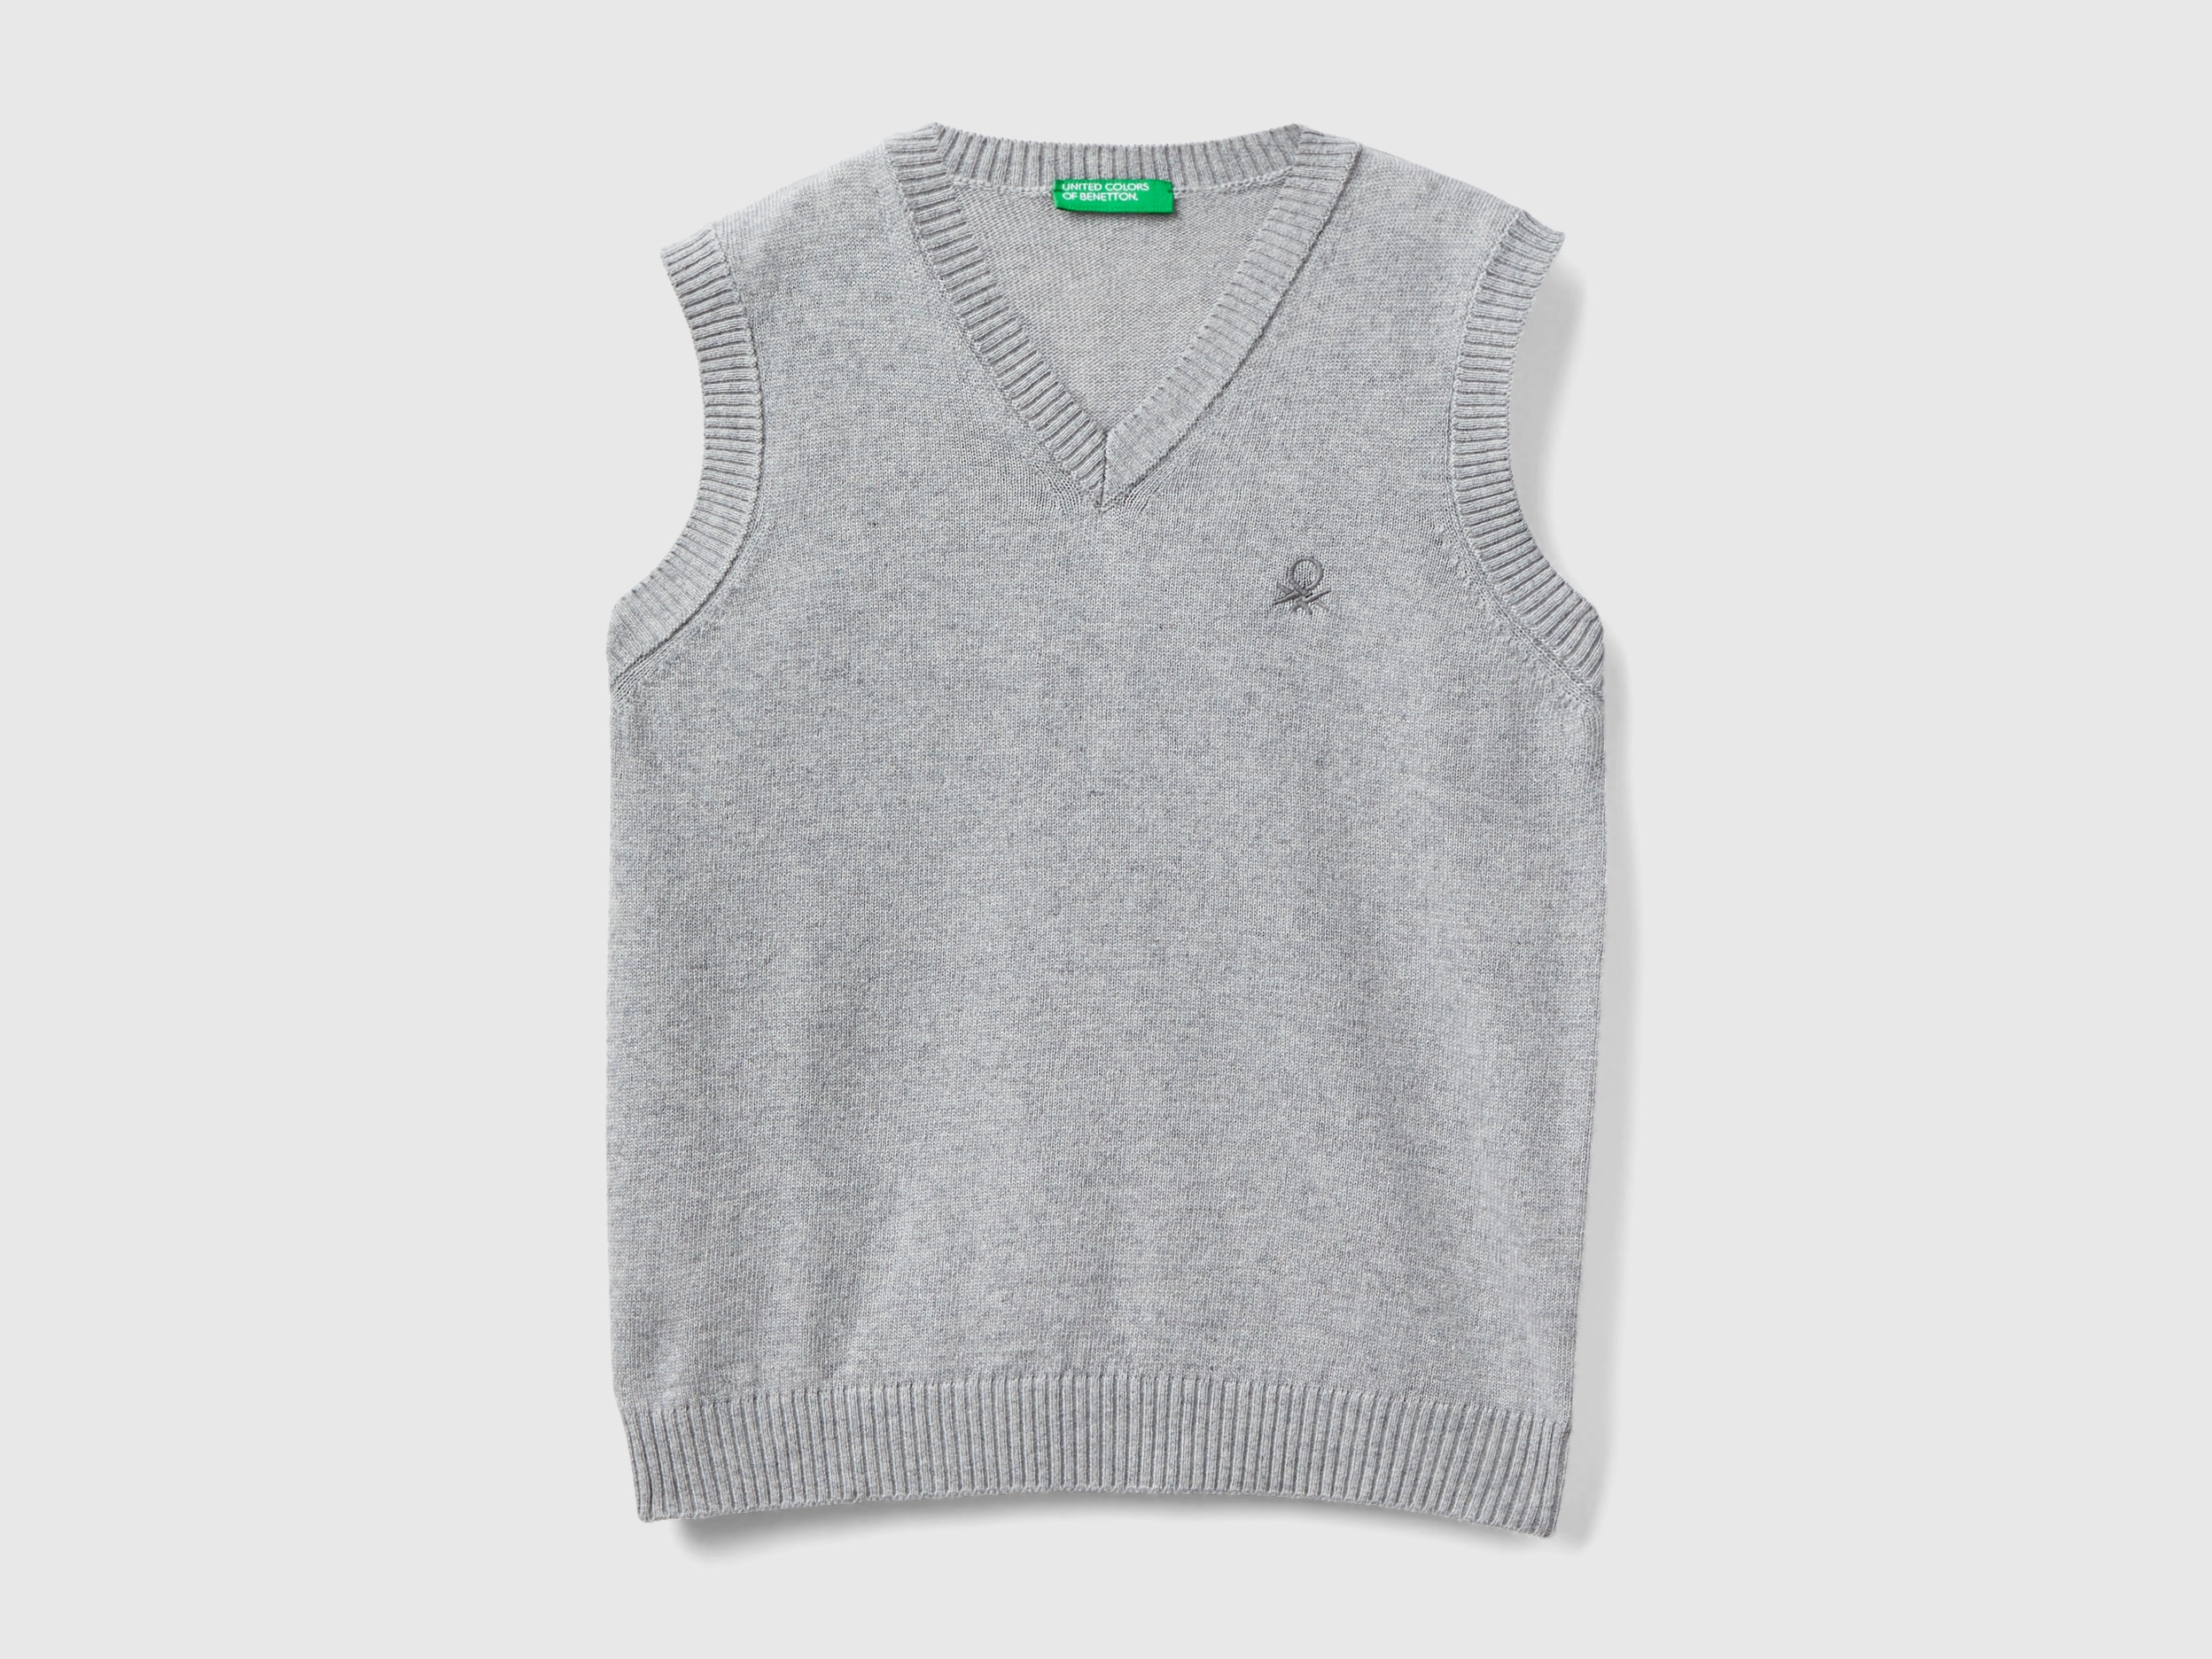 Benetton, Vest In Cashmere And Wool Blend, size L, Light Gray, Kids